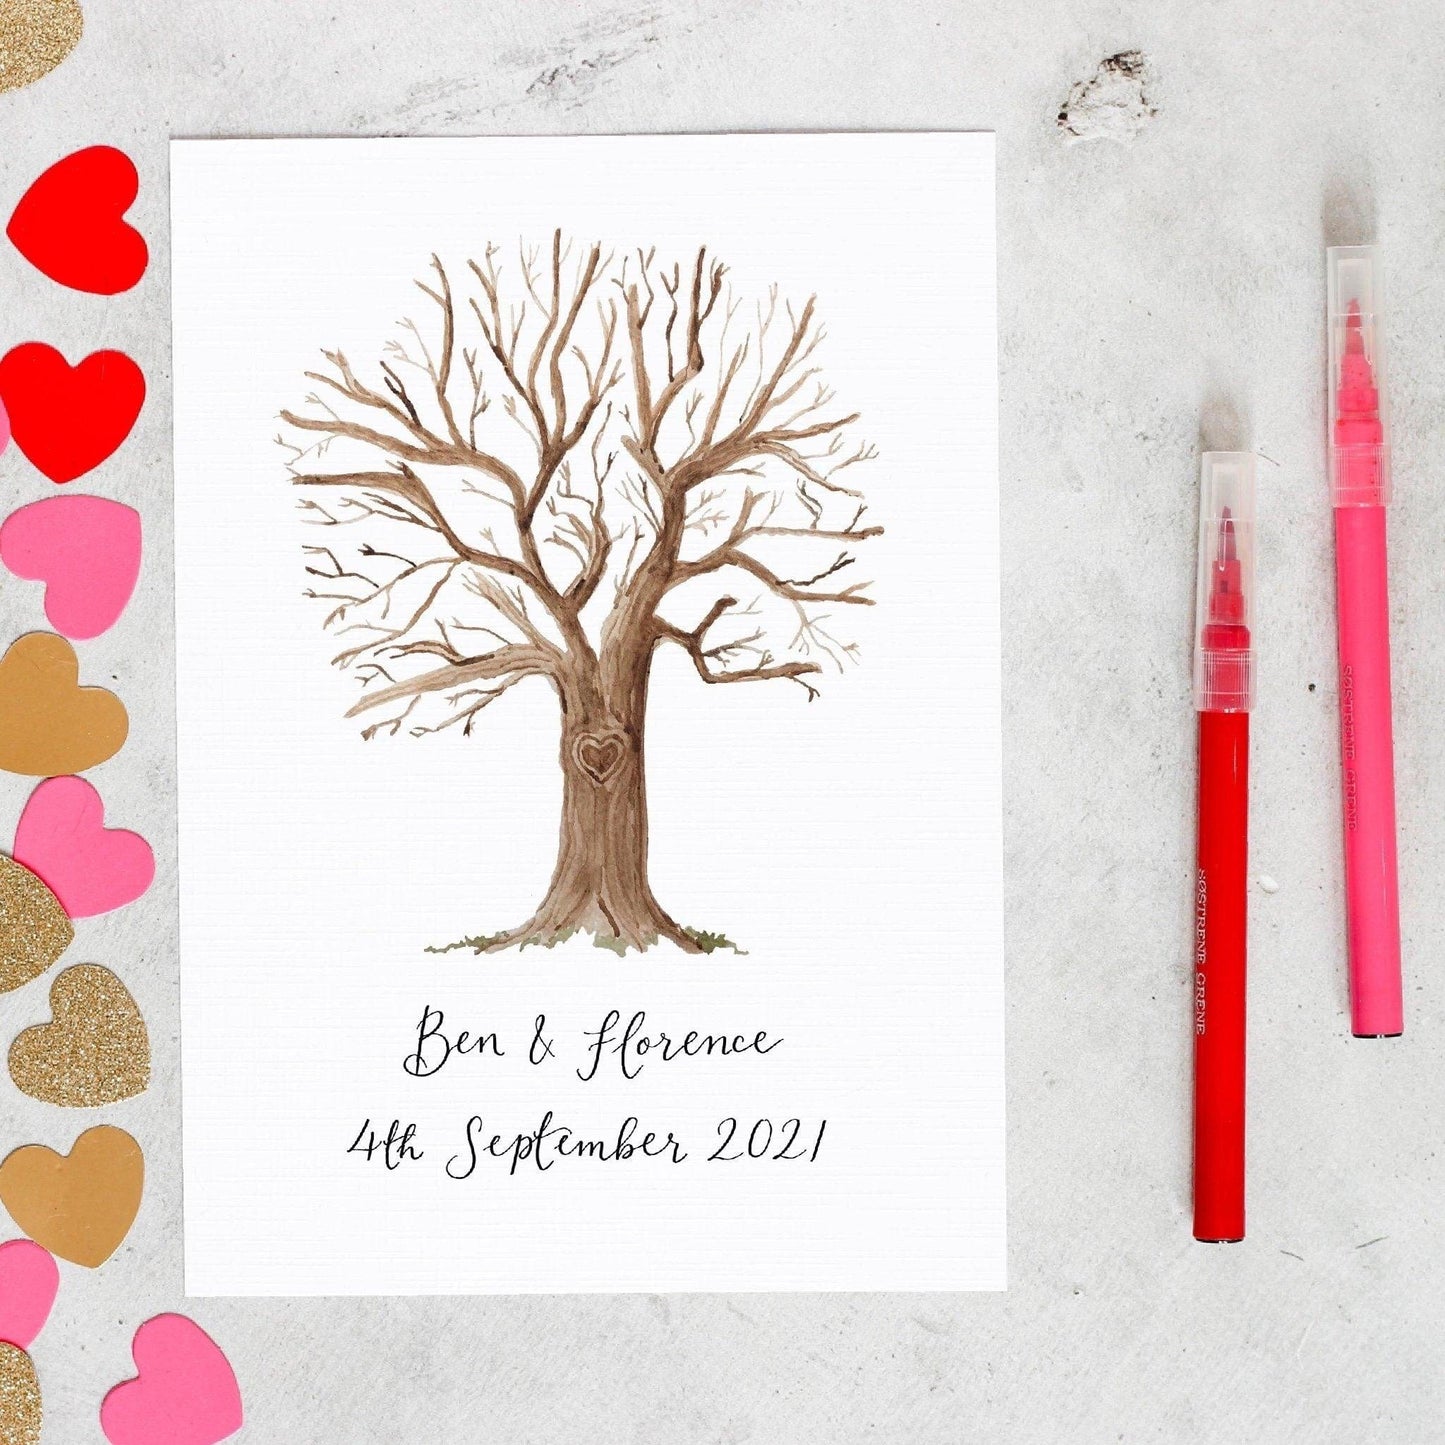 Personalised alternative wedding guest book And Hope Designs Commission